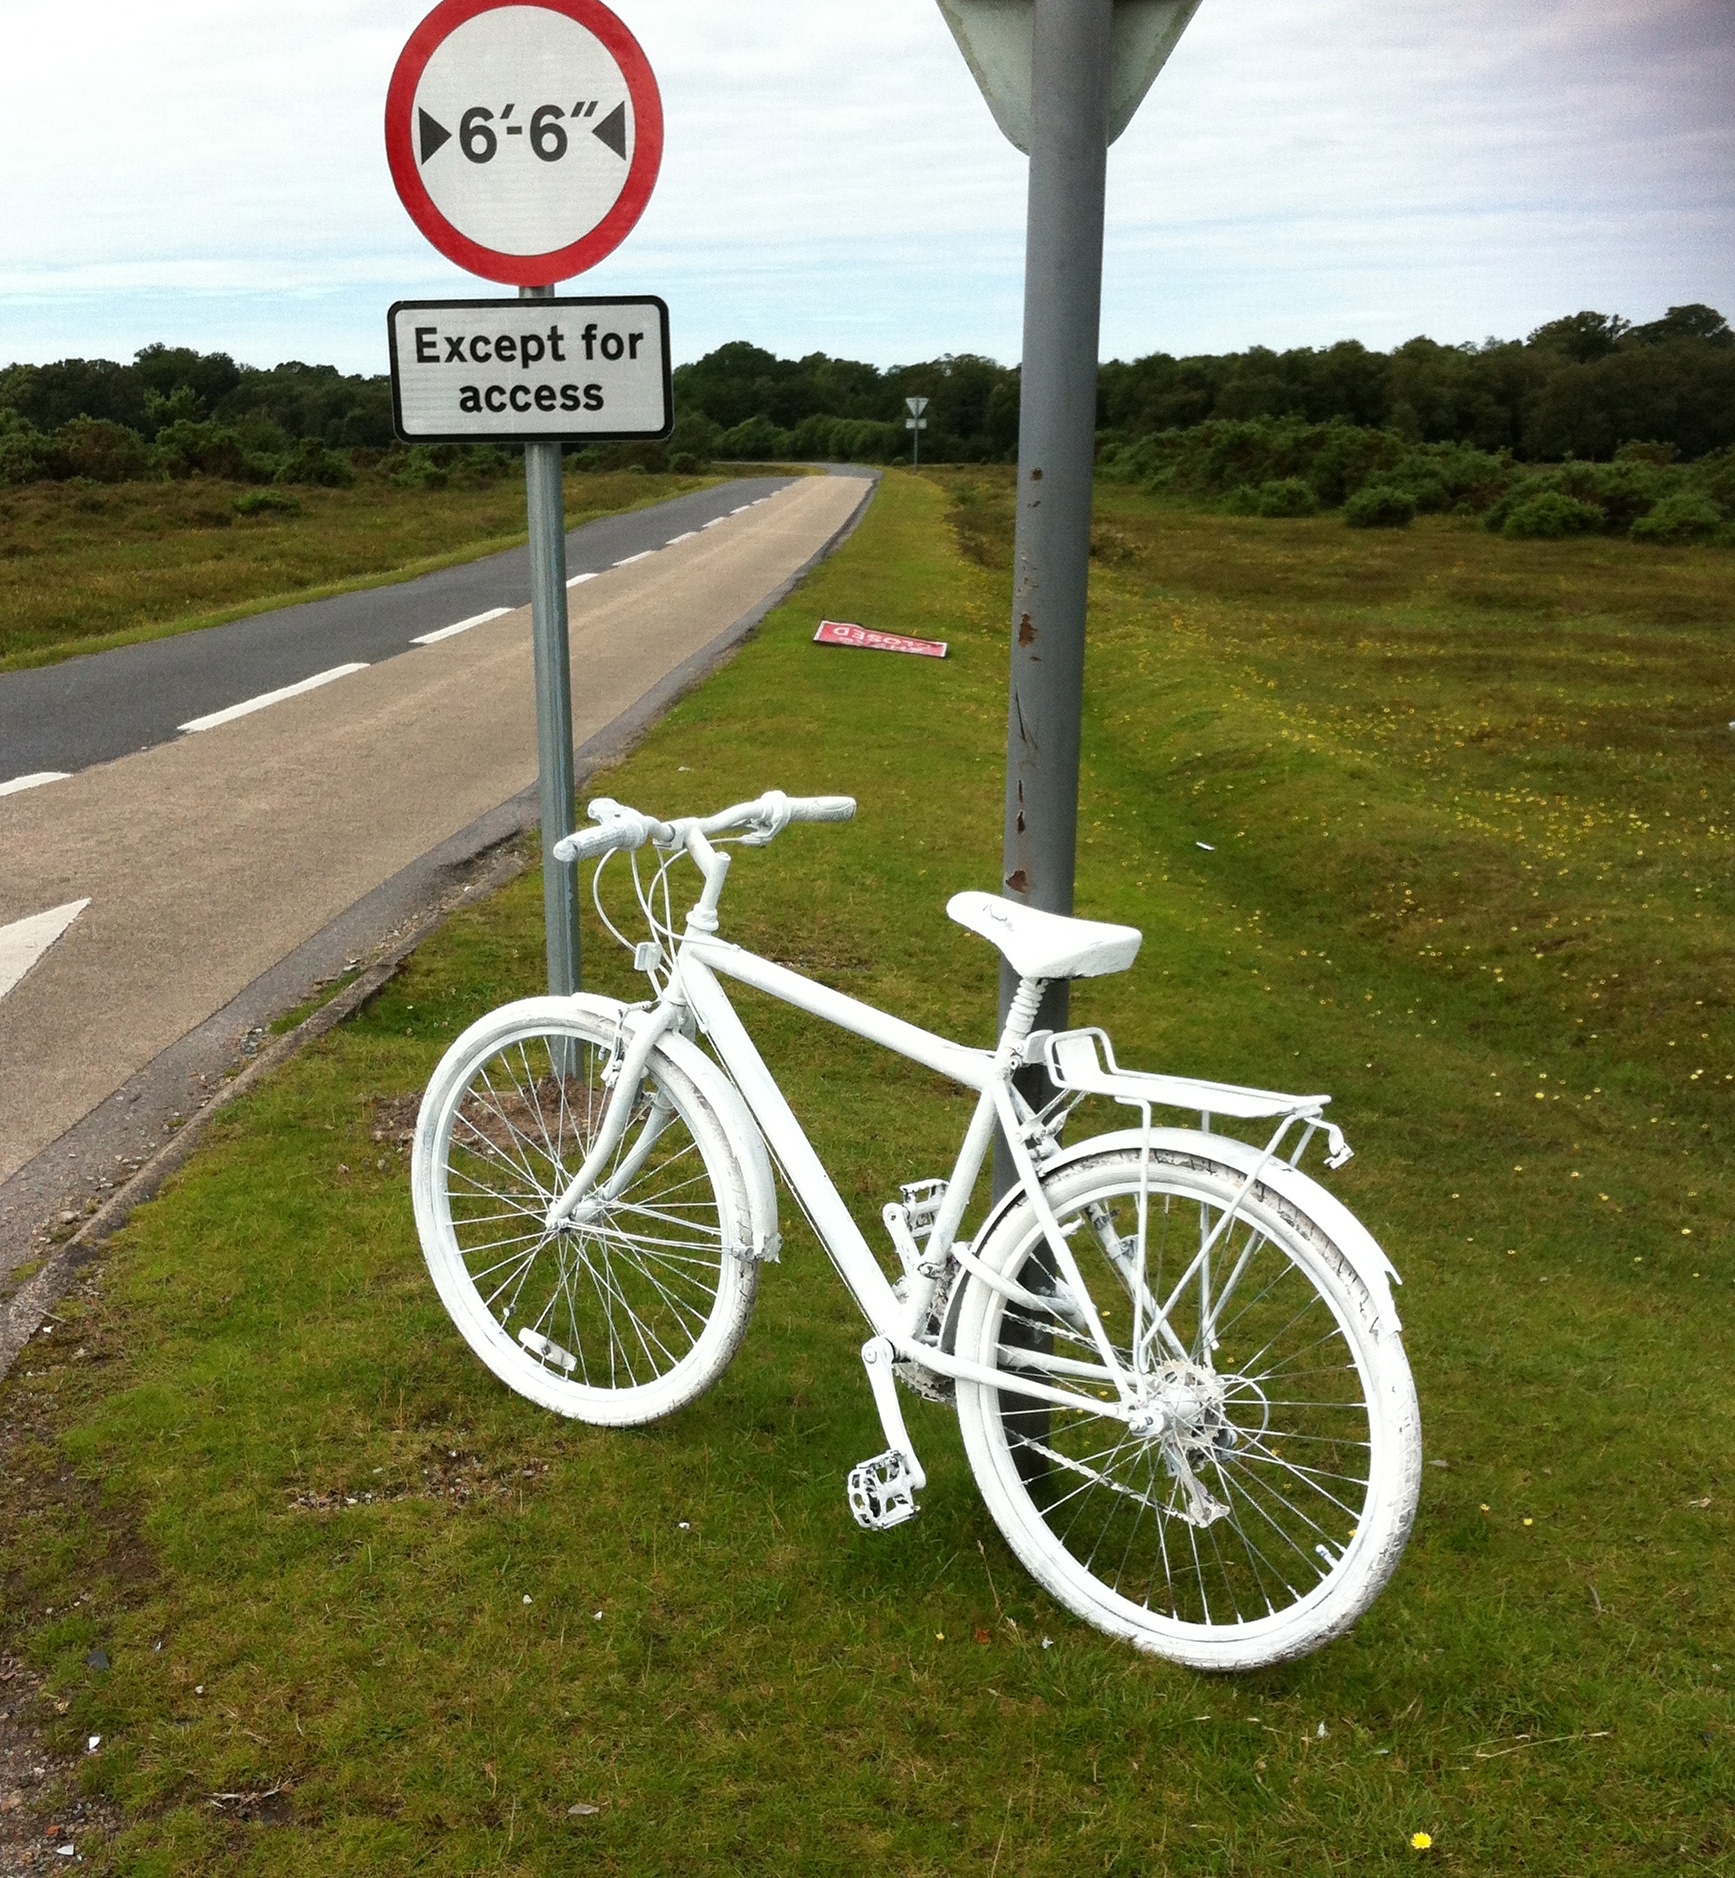 A white ghost bike was left at Ipley following one of the fatal crashes.